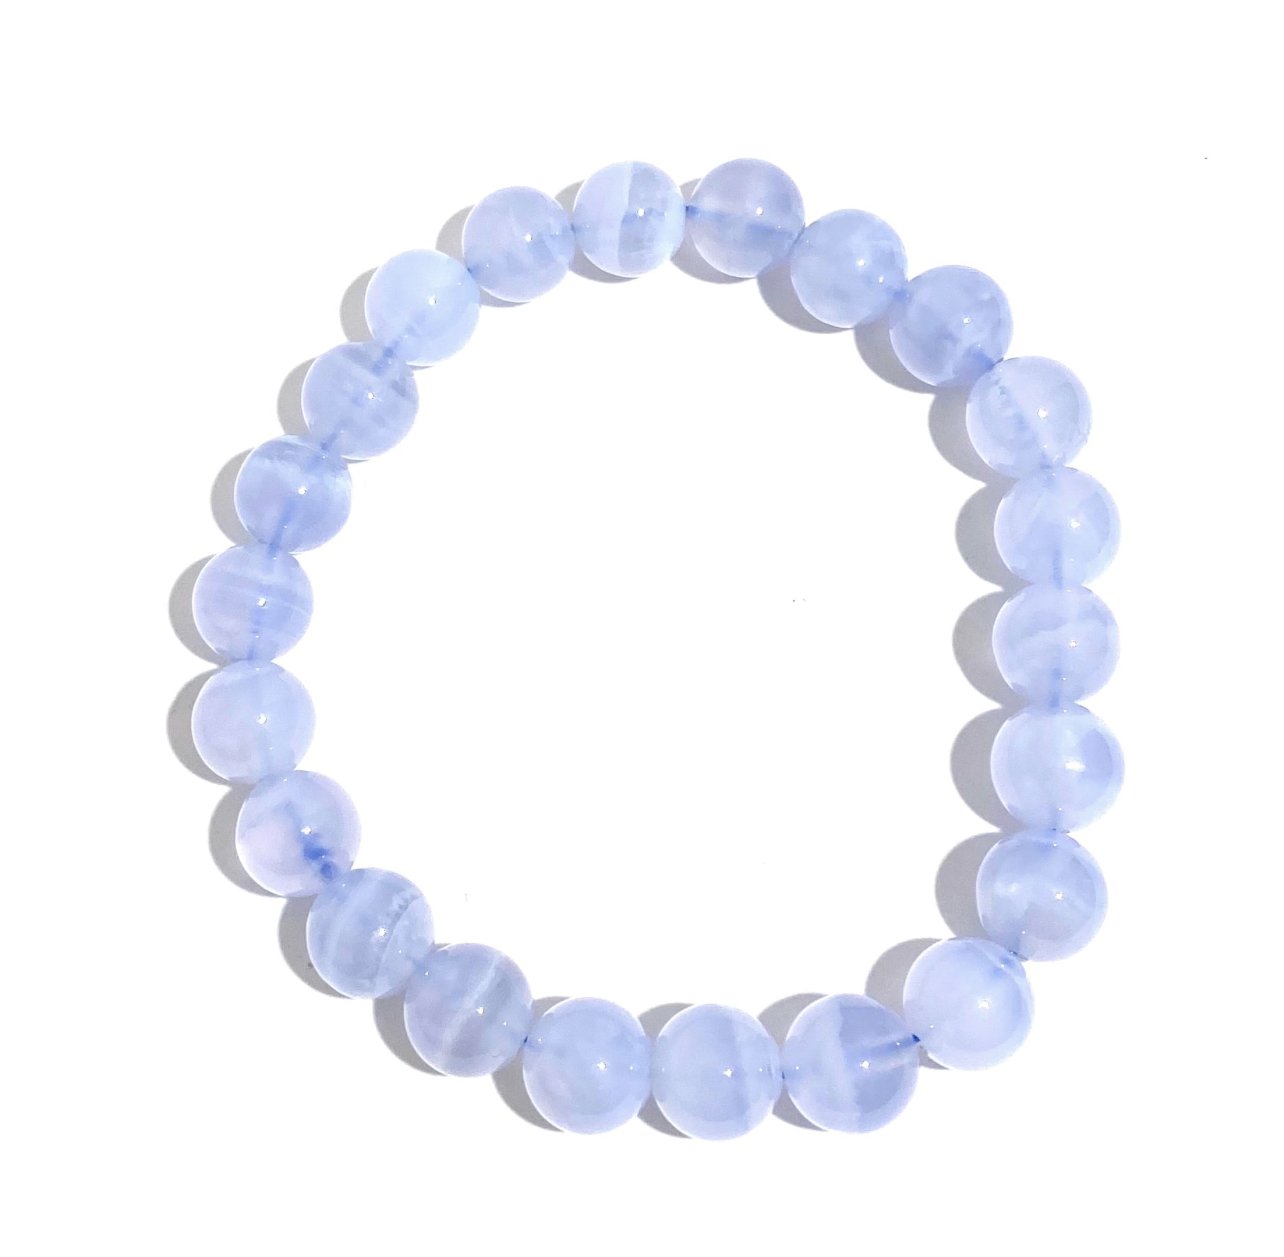 Buy Reiki Crystal Products Blue Lace Agate Bracelet, Round Bead 6 mm  Bracelet for Reiki Healing and Crystal Healing Stones Online at Best Prices  in India - JioMart.